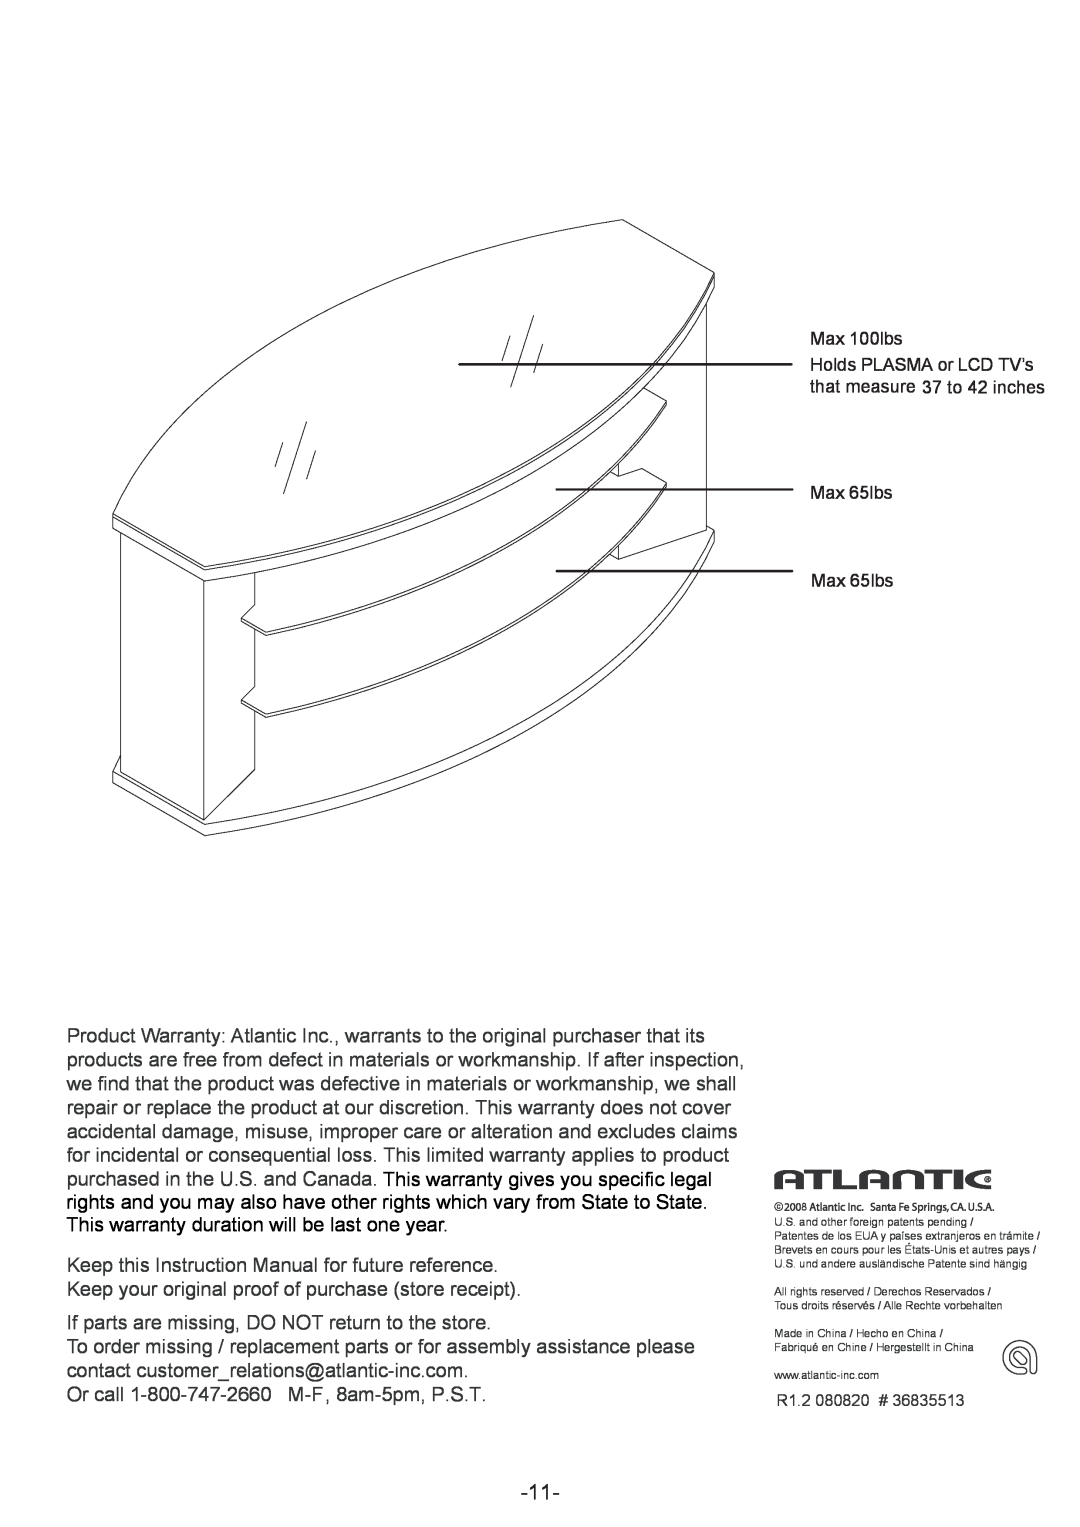 Atlantic 36835513 manual If parts are missing, DO NOT return to the store 